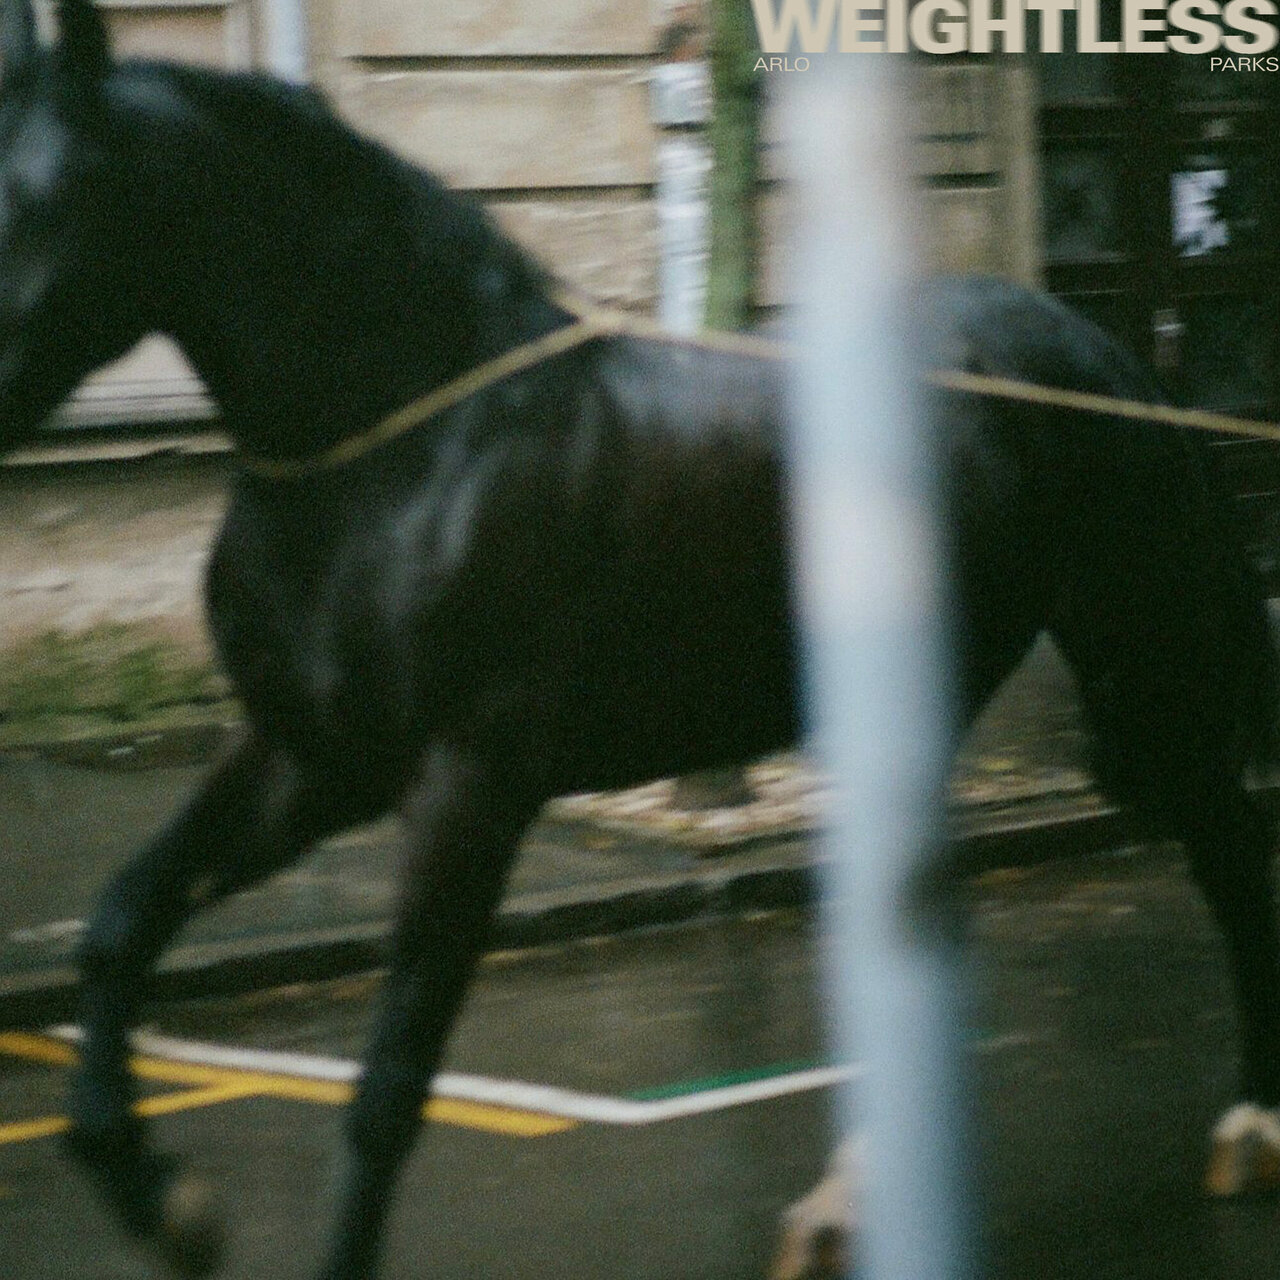 Arlo Parks — Weightless cover artwork